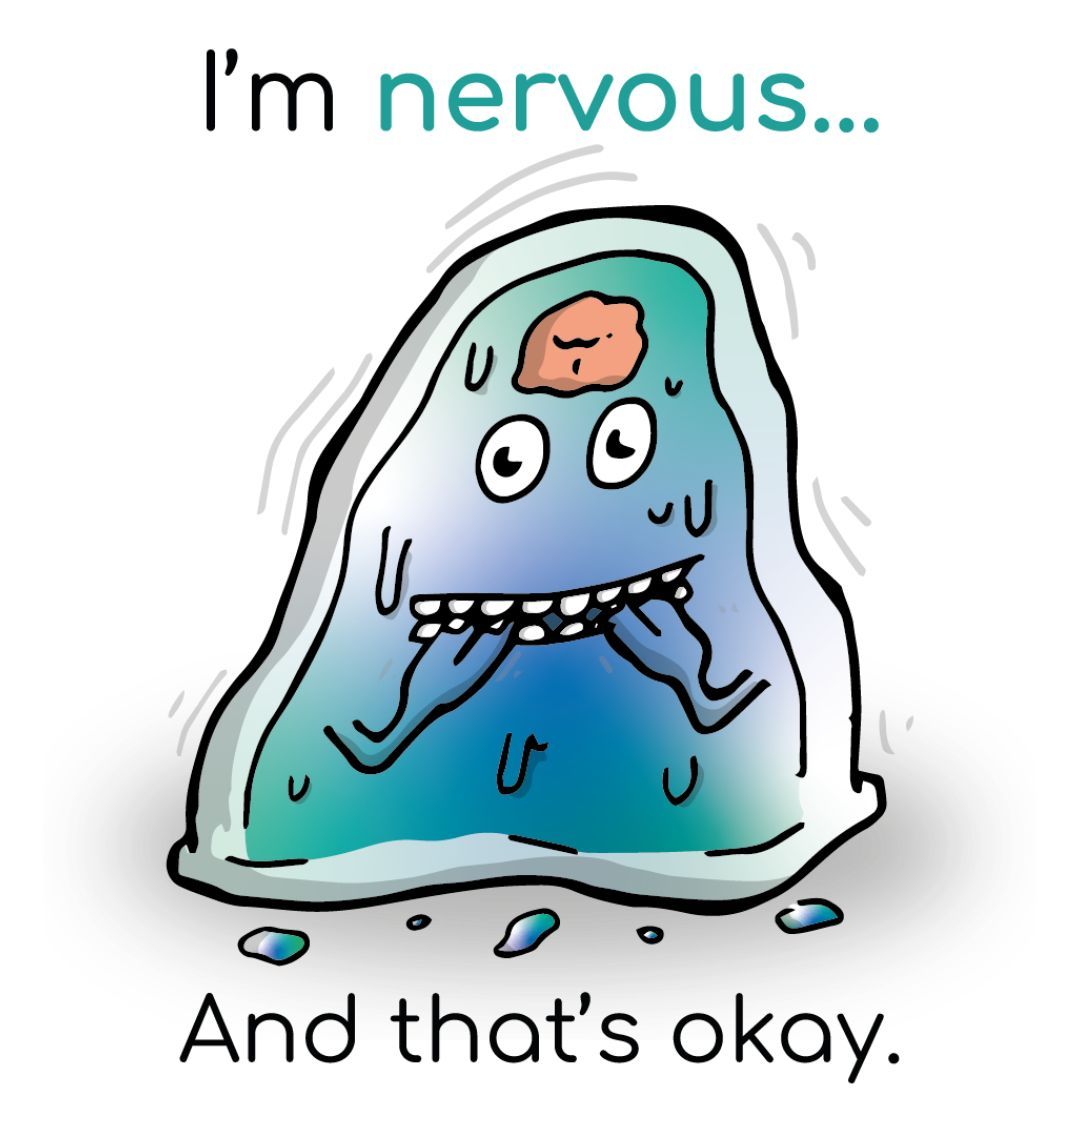 "I'm nervous... And that's okay!" Round Children's Emotions Sticker 60mm x 60mm